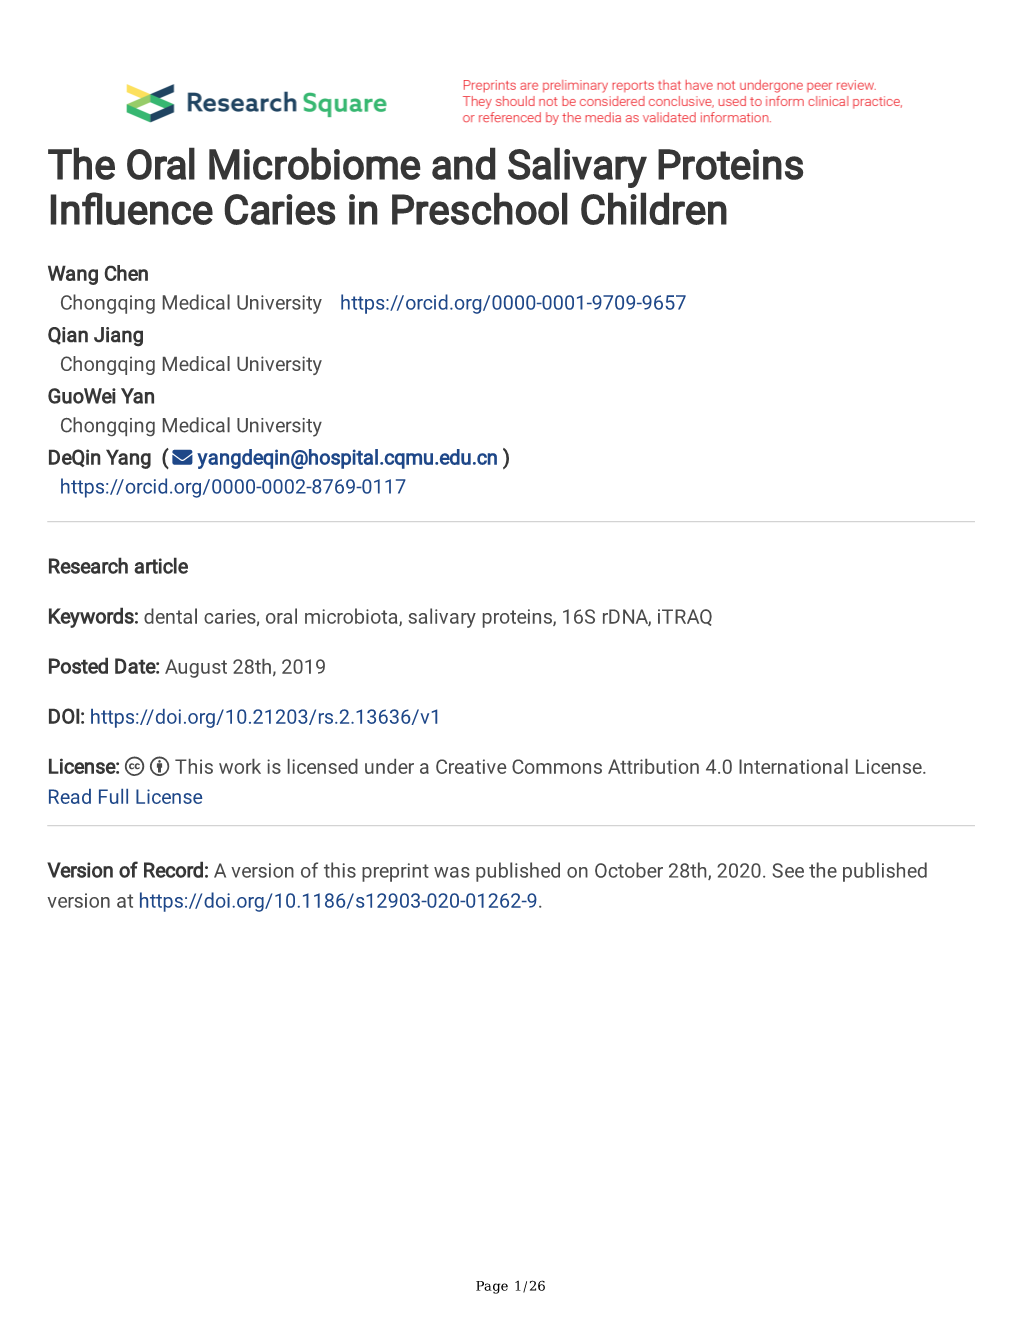 The Oral Microbiome and Salivary Proteins Influence Caries in Preschool Children